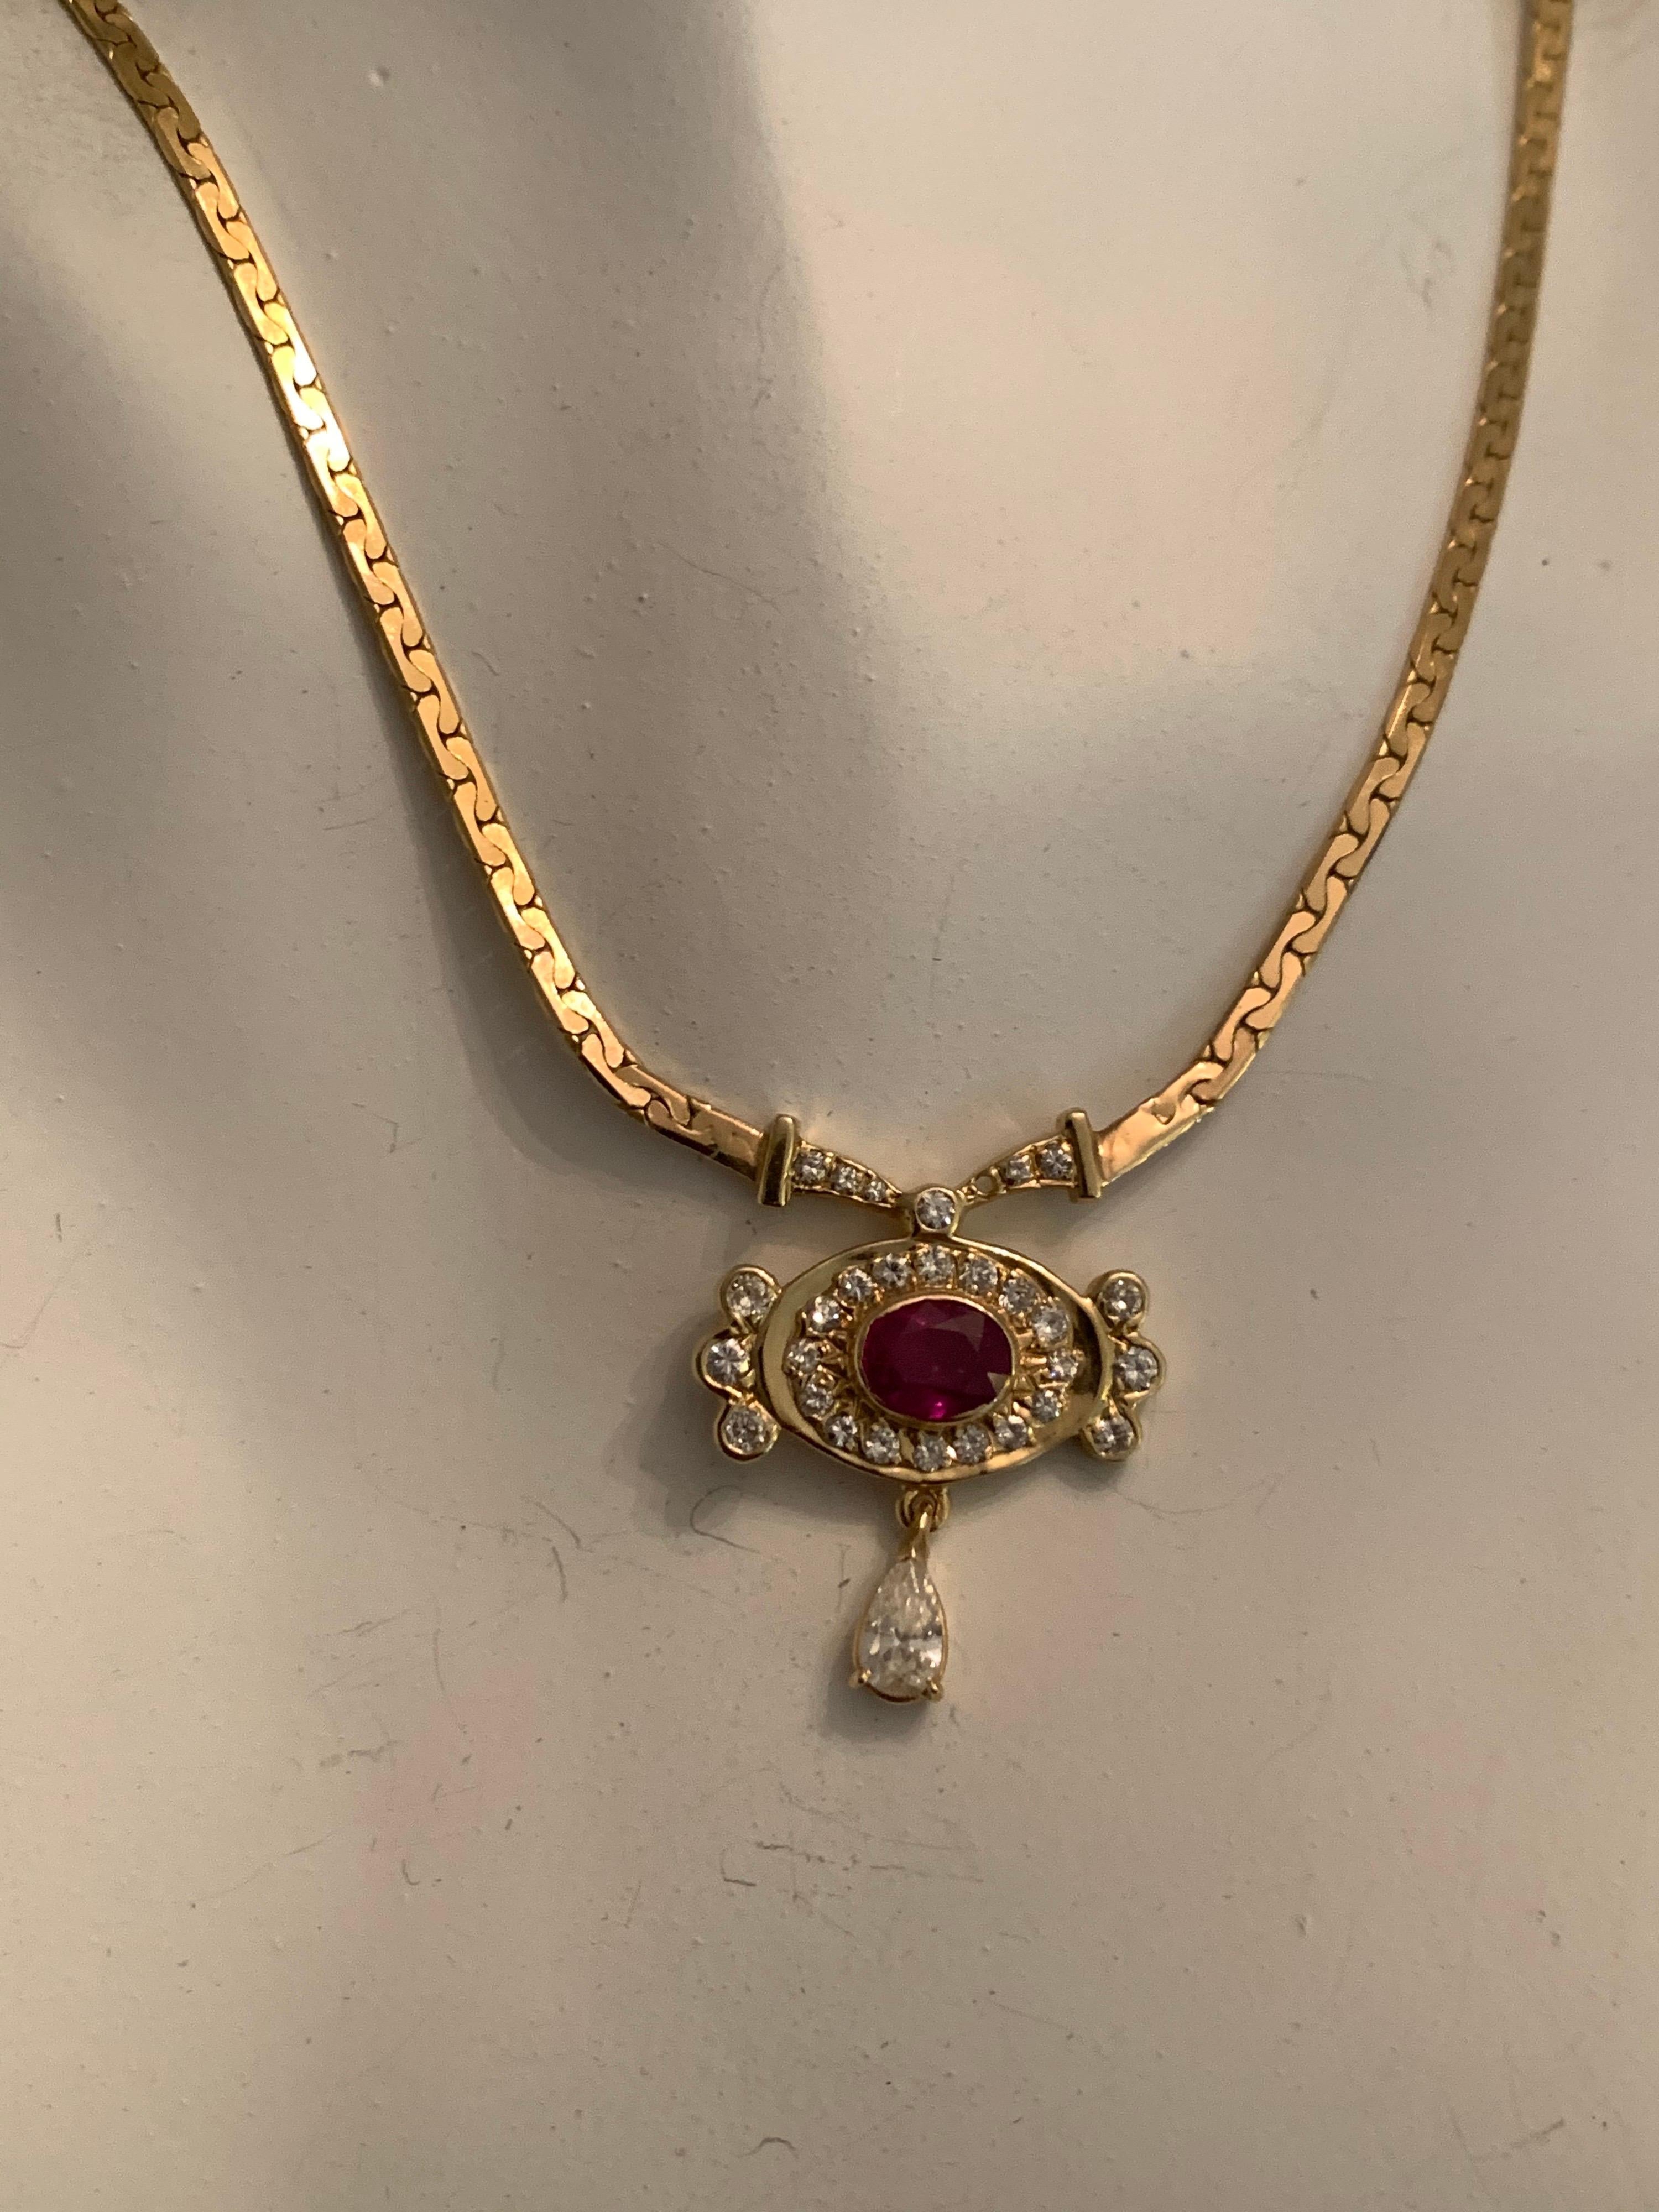 Oval Cut Retro Gold Necklace 3.25 Carat Total Natural Ruby & Diamond Gem Stone circa 1960 For Sale